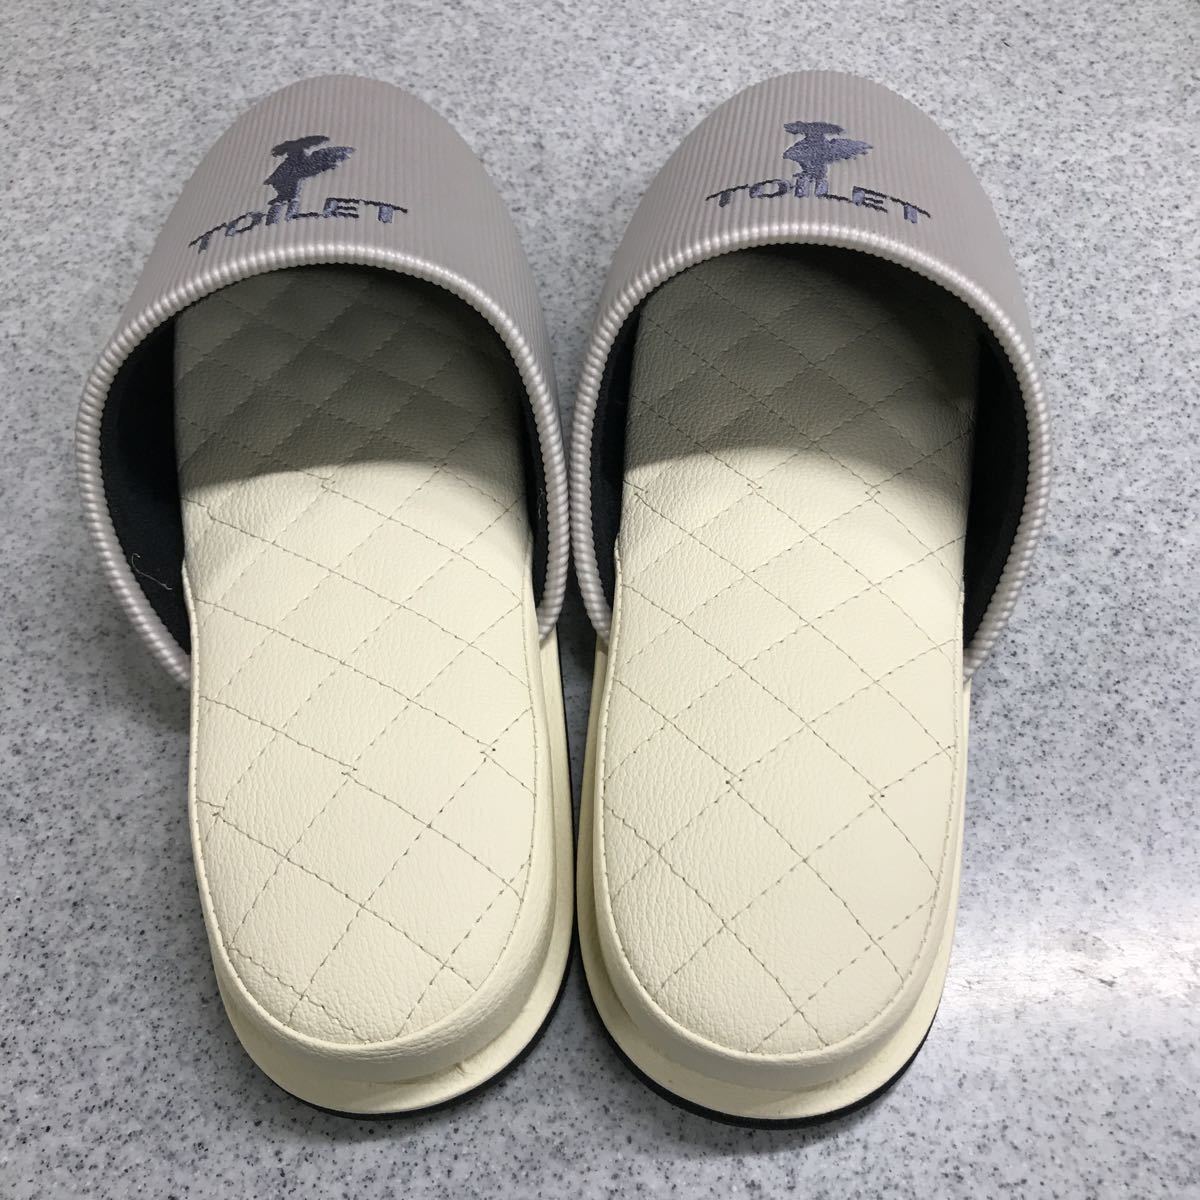  new goods toilet slippers imitation leather embroidery anti-bacterial deodorization 27.( gray ) made in Japan 